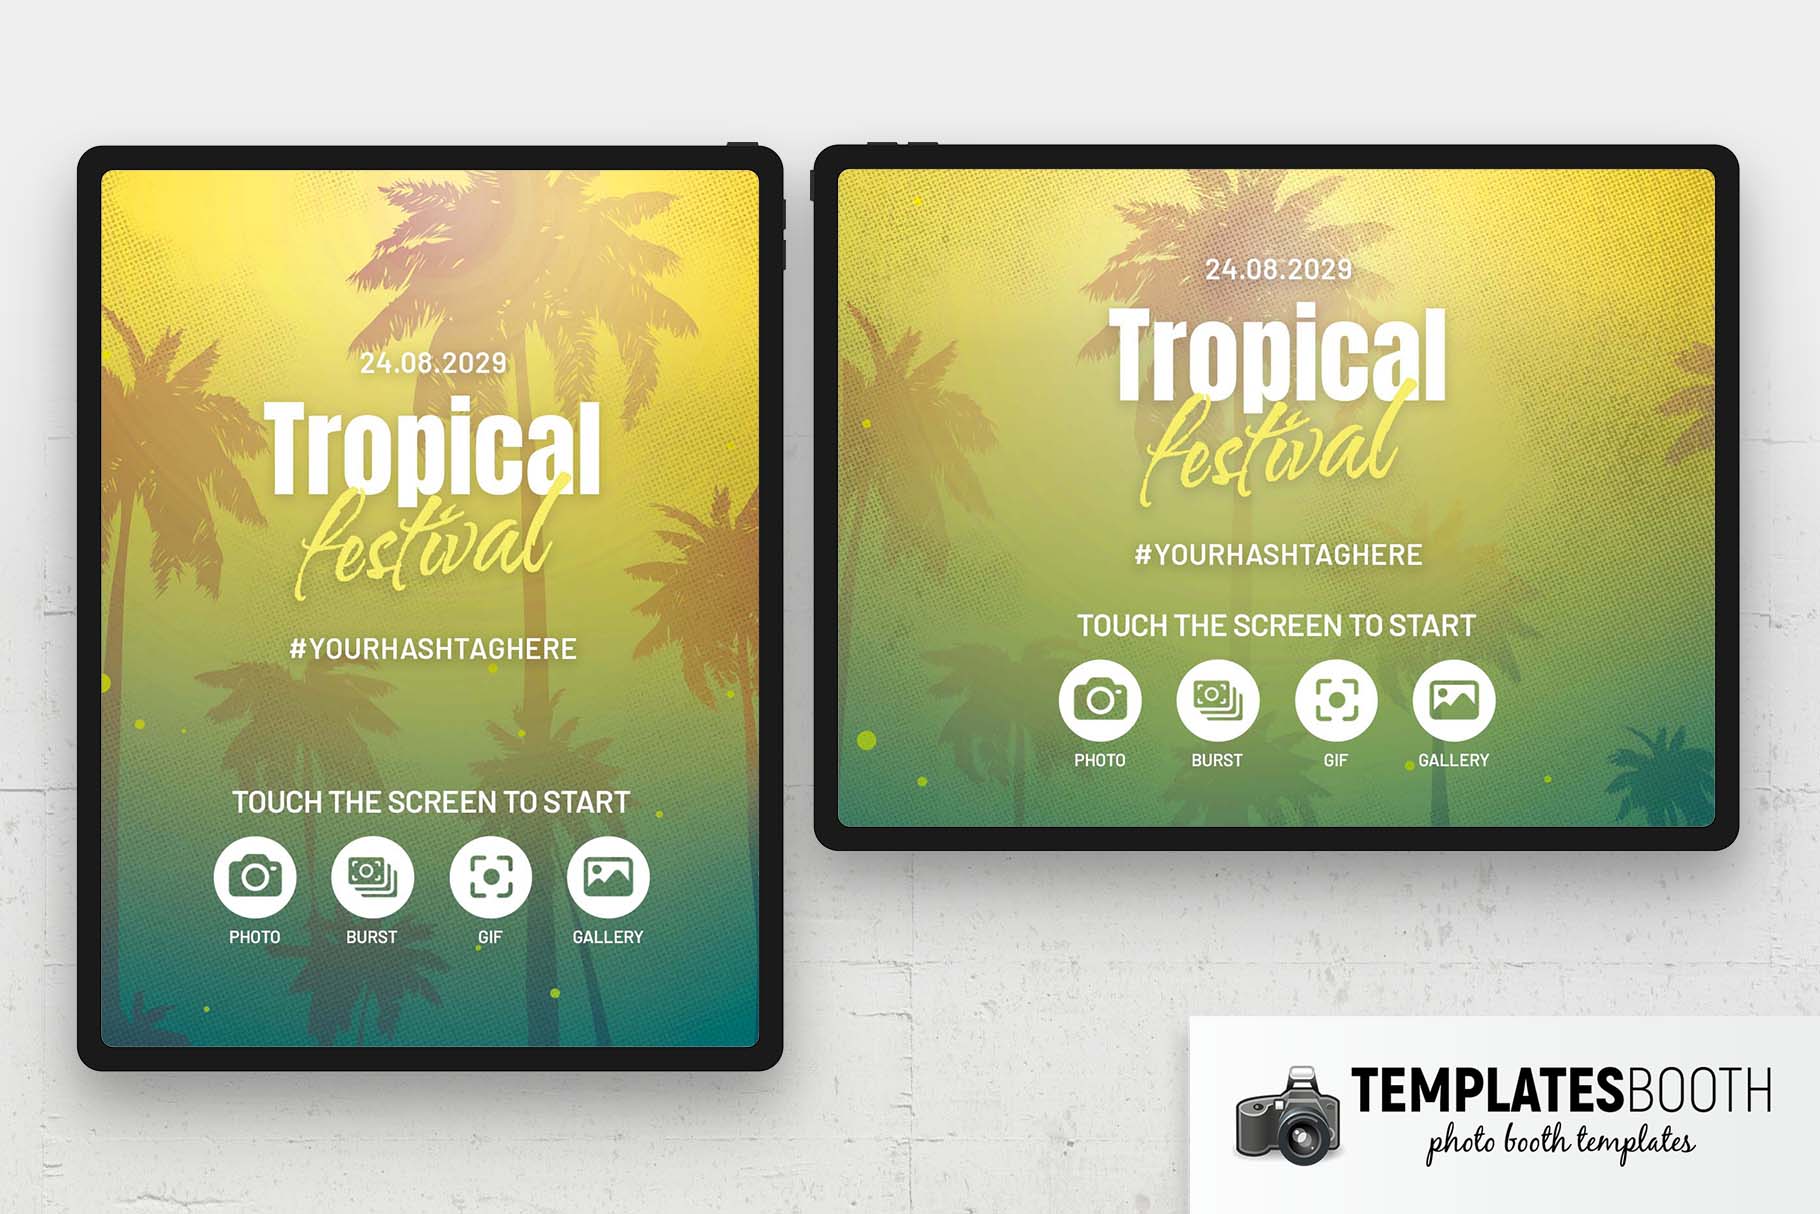 Free Tropical Photo Booth Welcome Screen